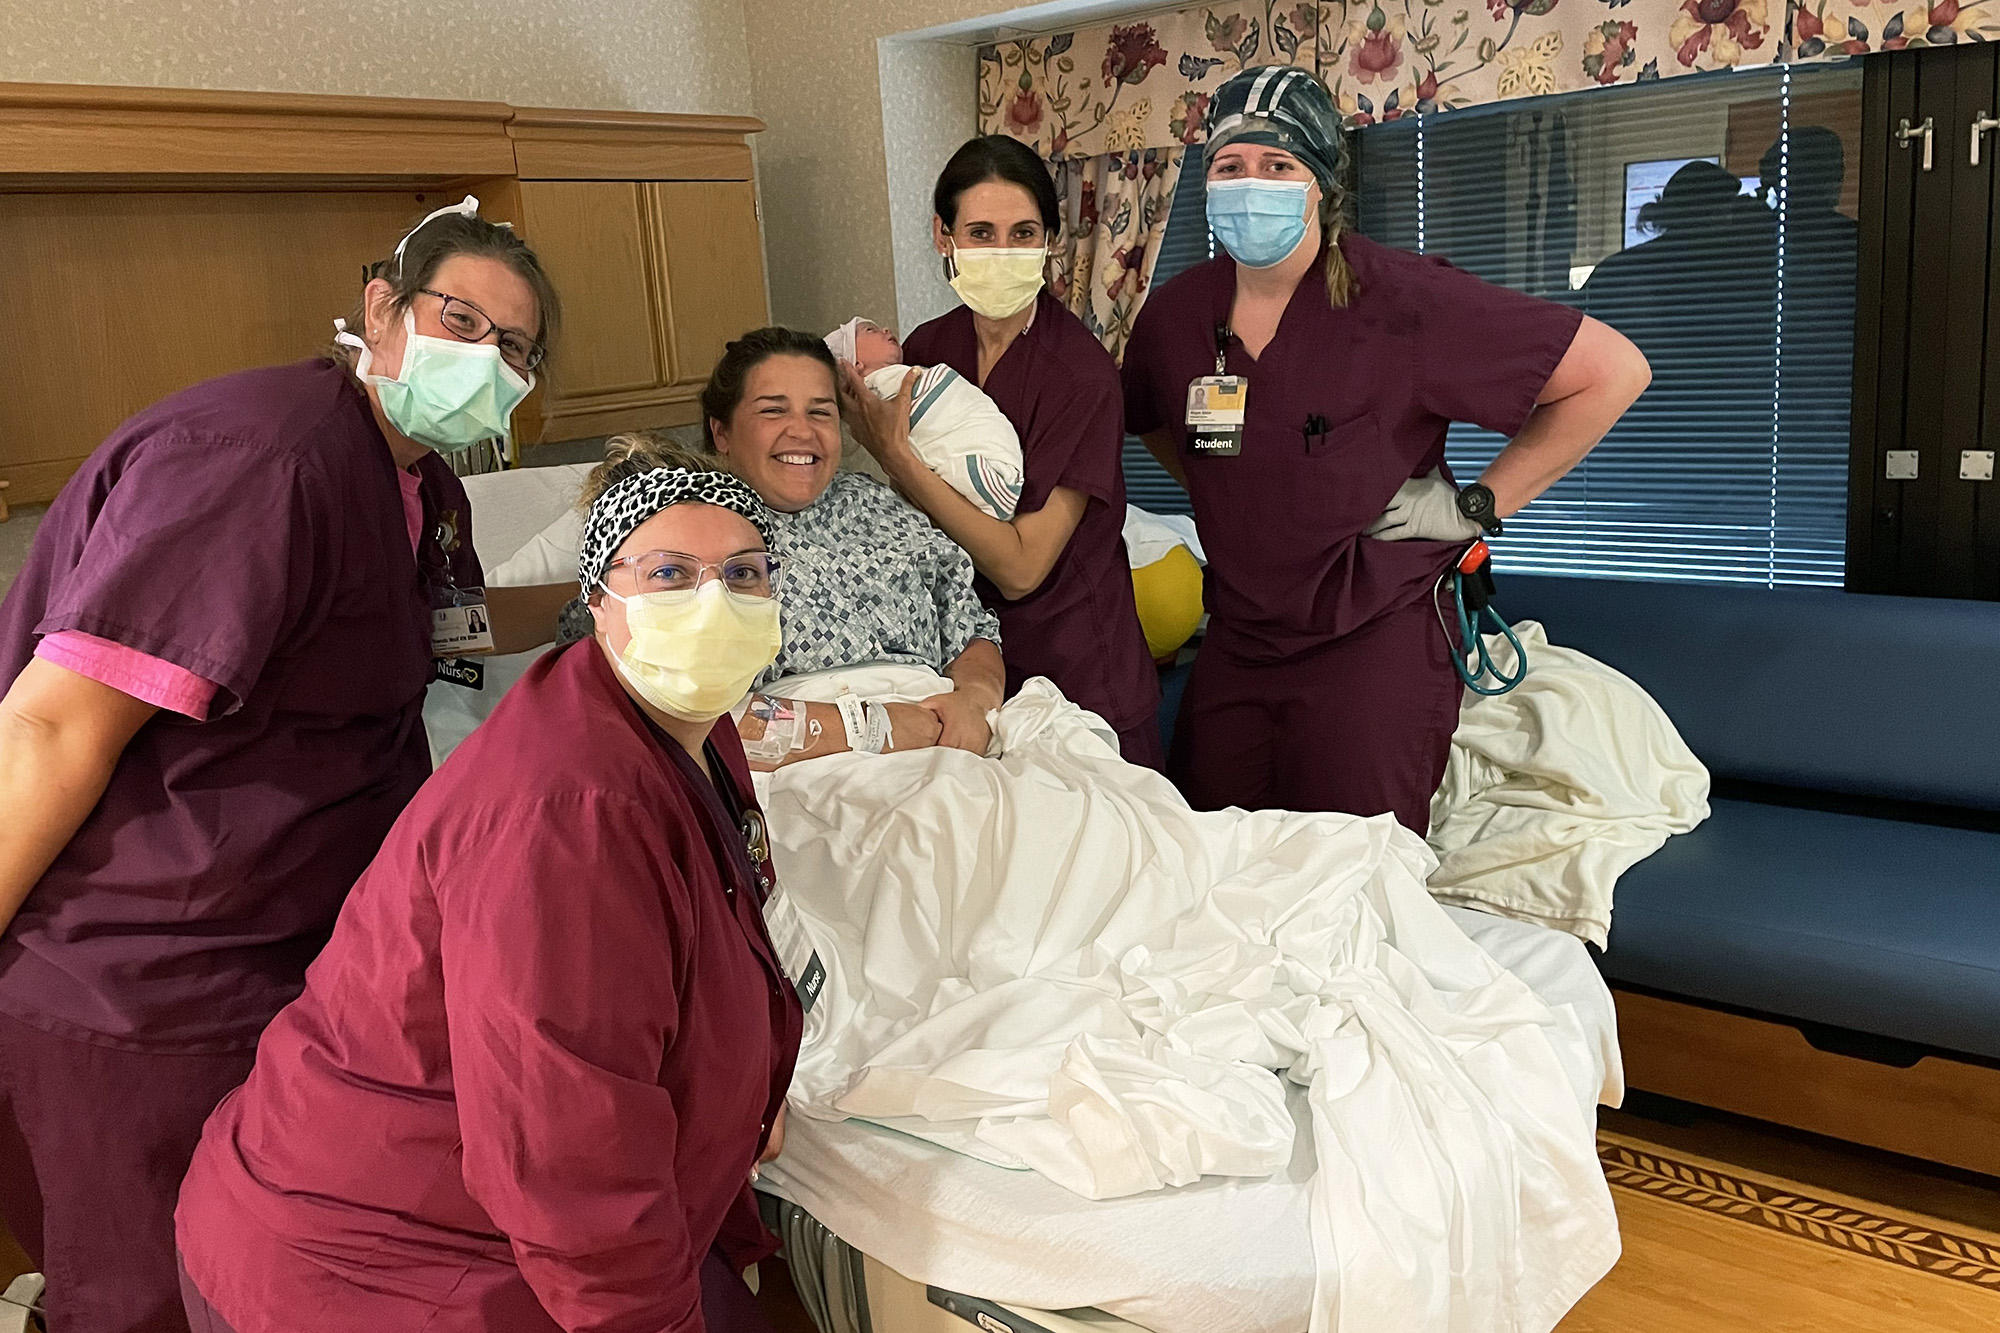 a woman in a hospital bed, surrounded by health care professionals, one of whom is holding a newborn baby